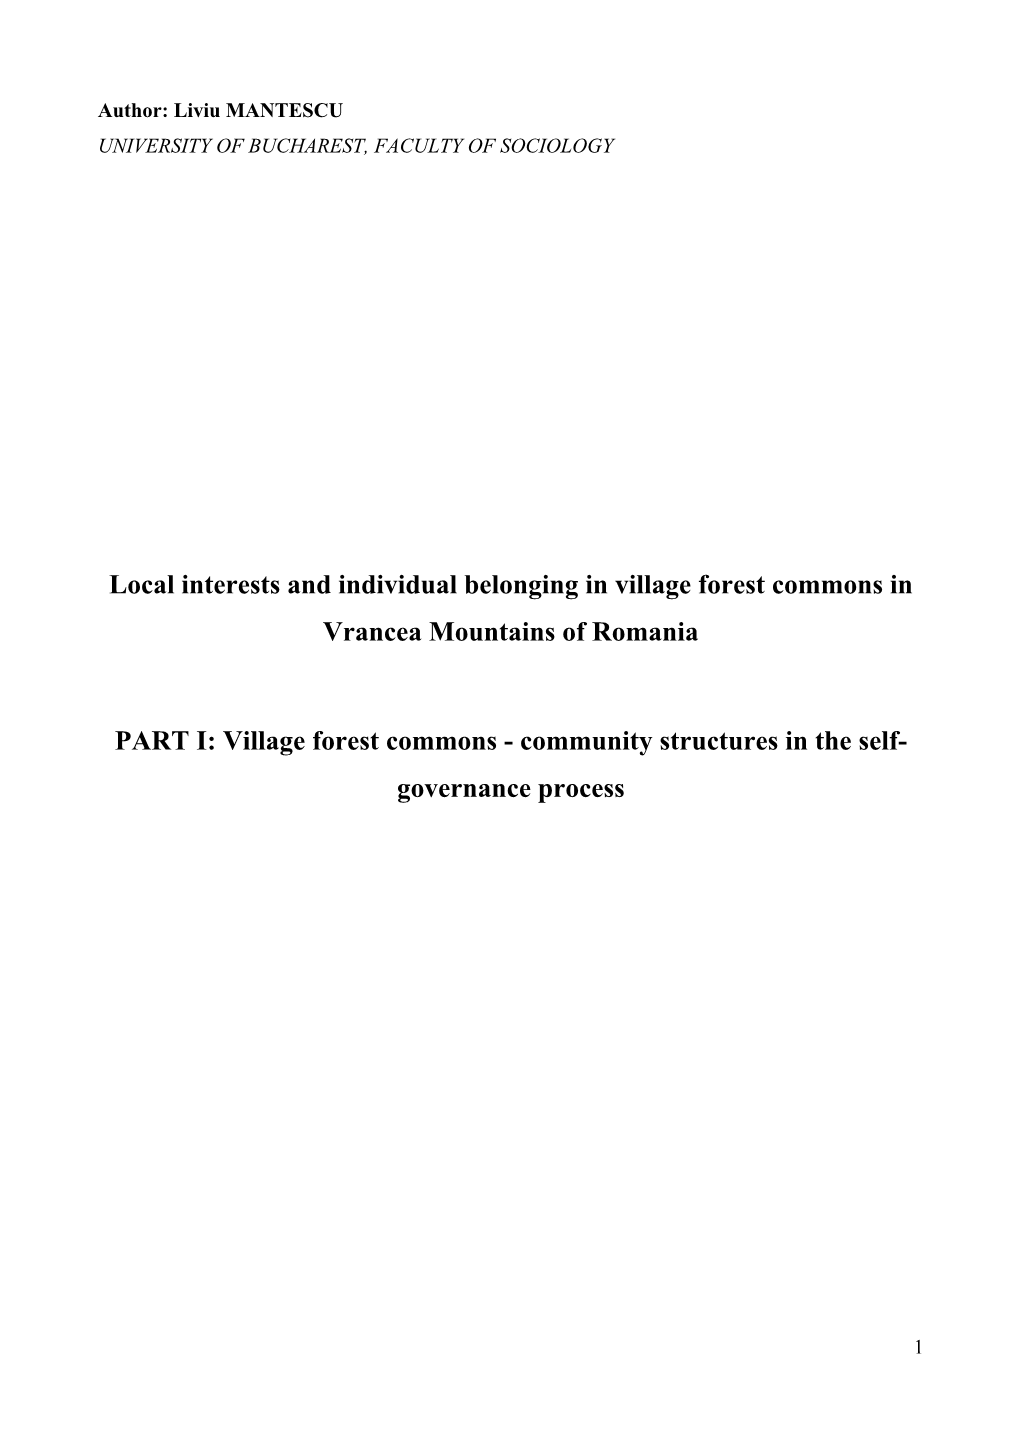 Local Interests and Individual Belonging in Village Forest Commons in Vrancea Mountains of Romania